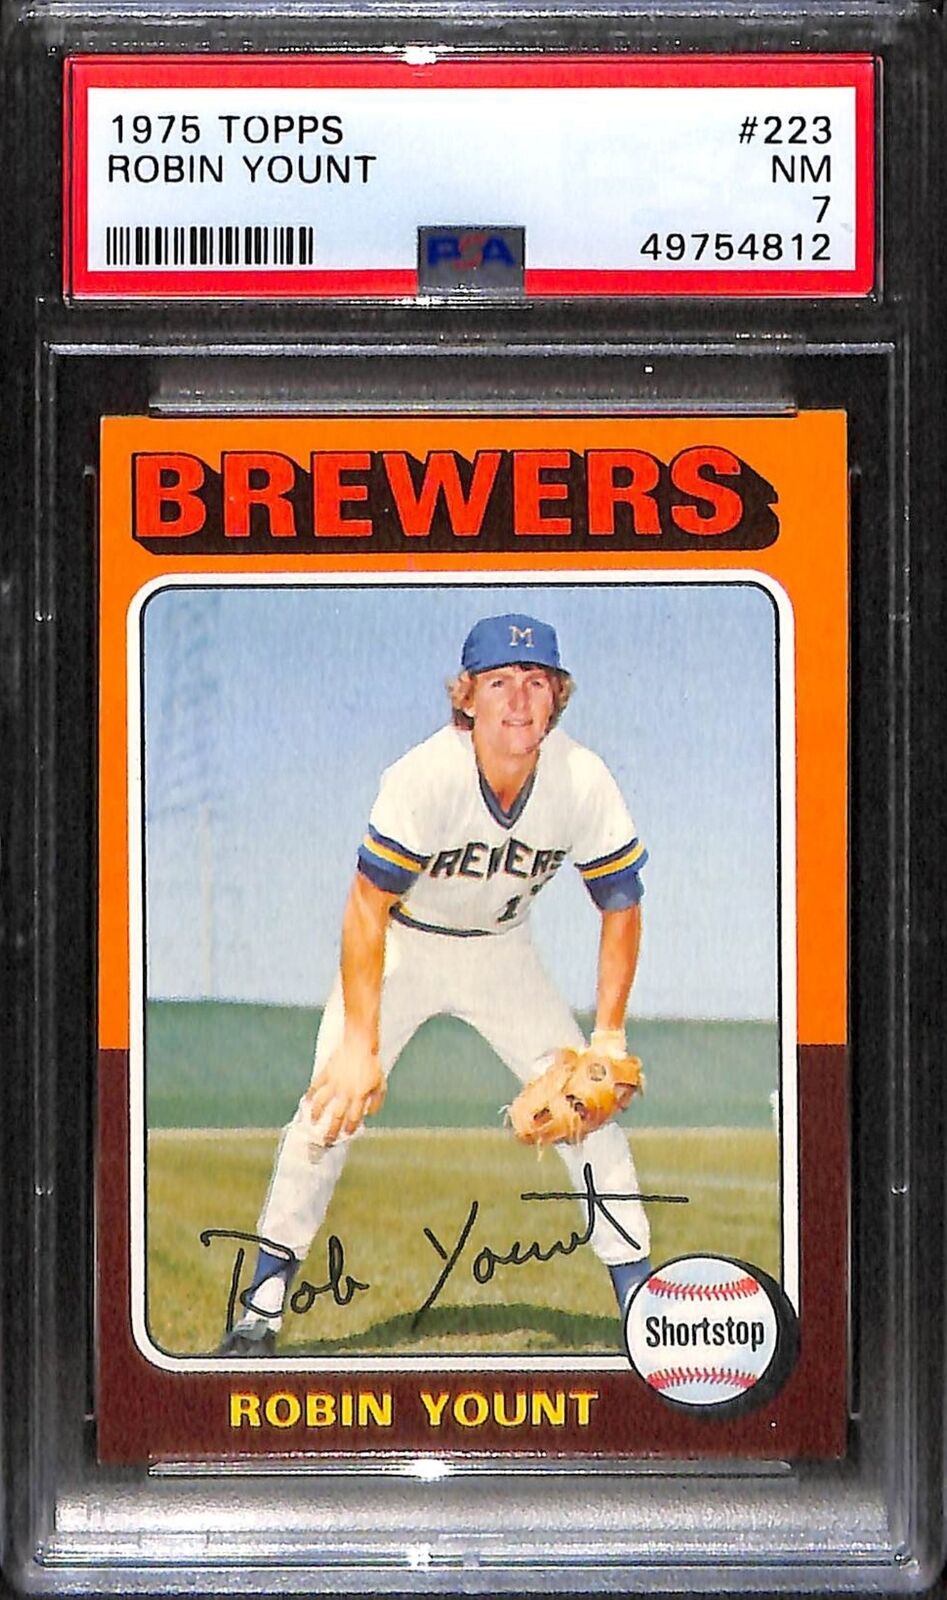 1975 Topps #223 ROBIN YOUNT ROOKIE RC BREWERS NM HOF PSA 7 49754812